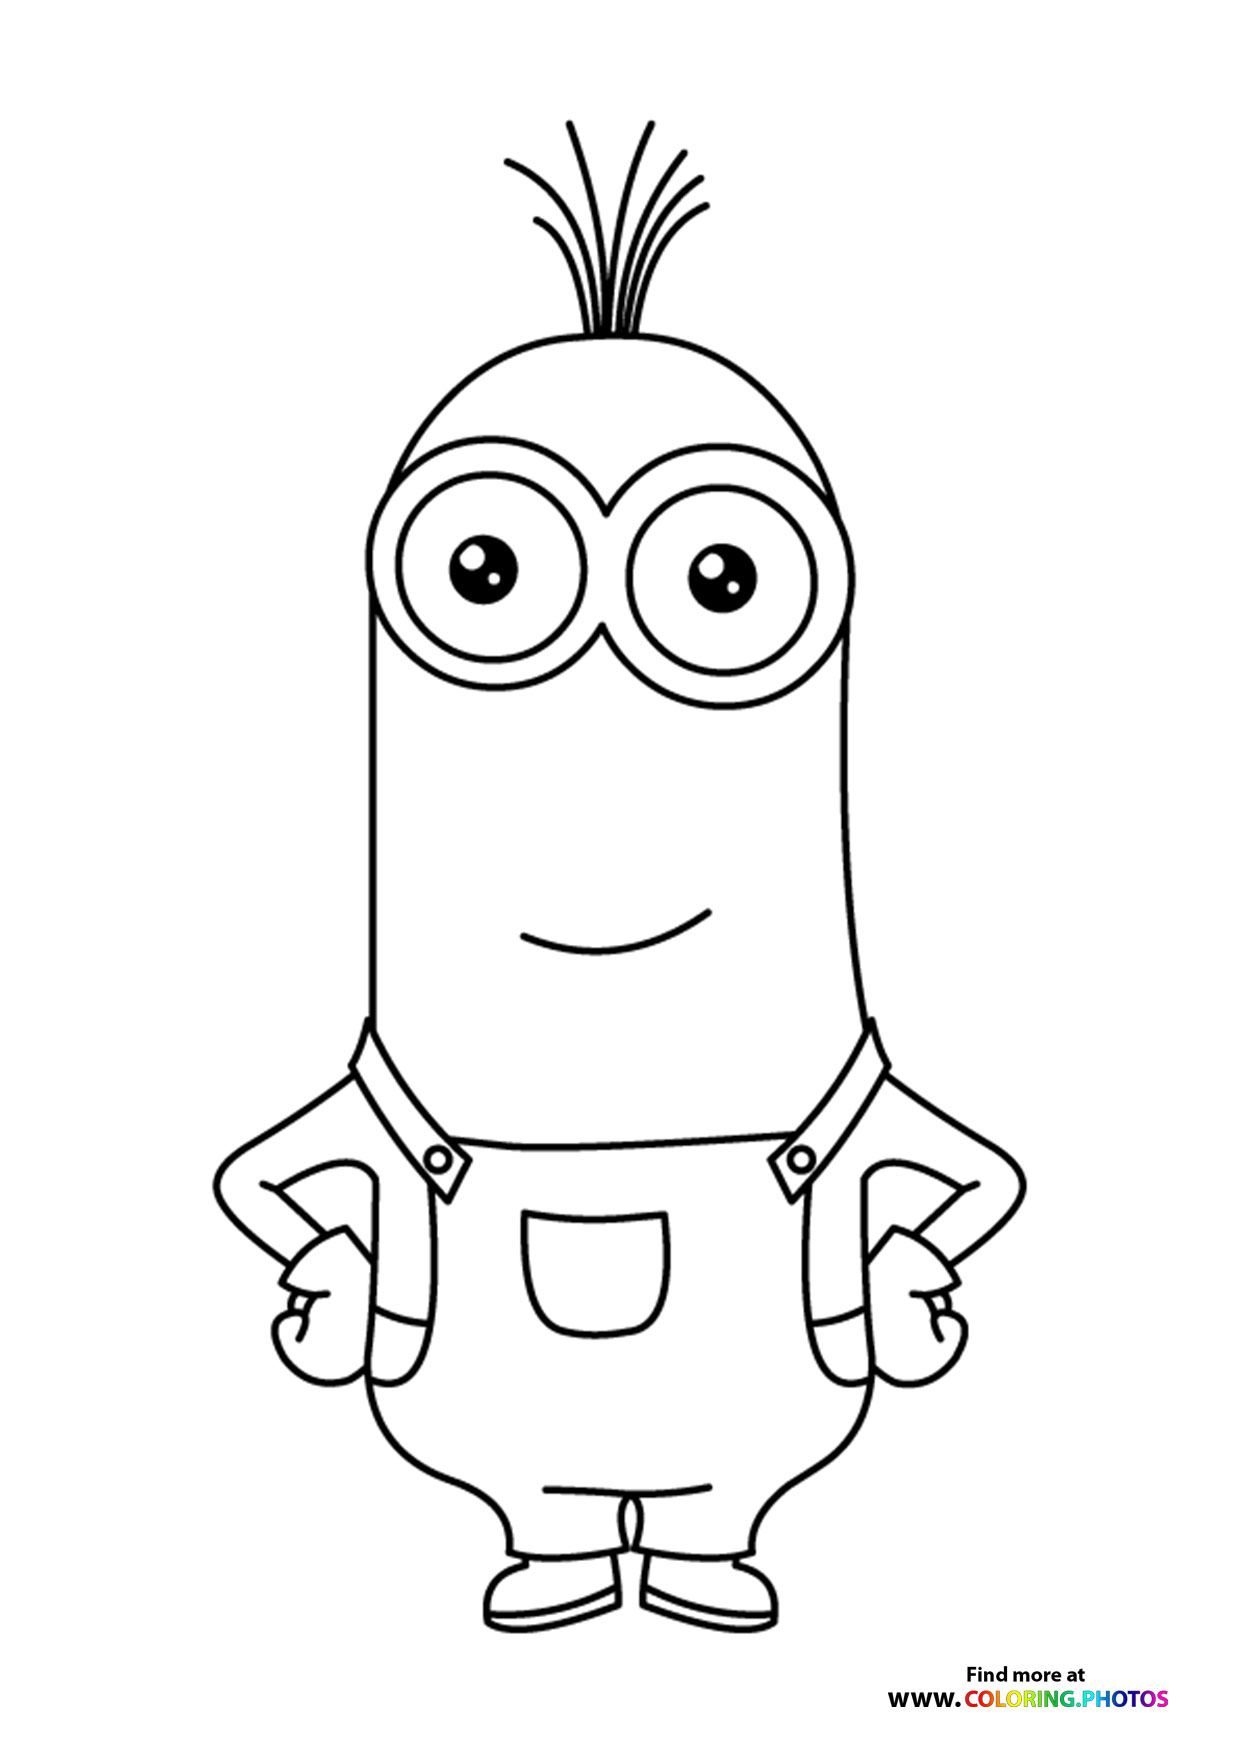 Minion kevin from rise of gru